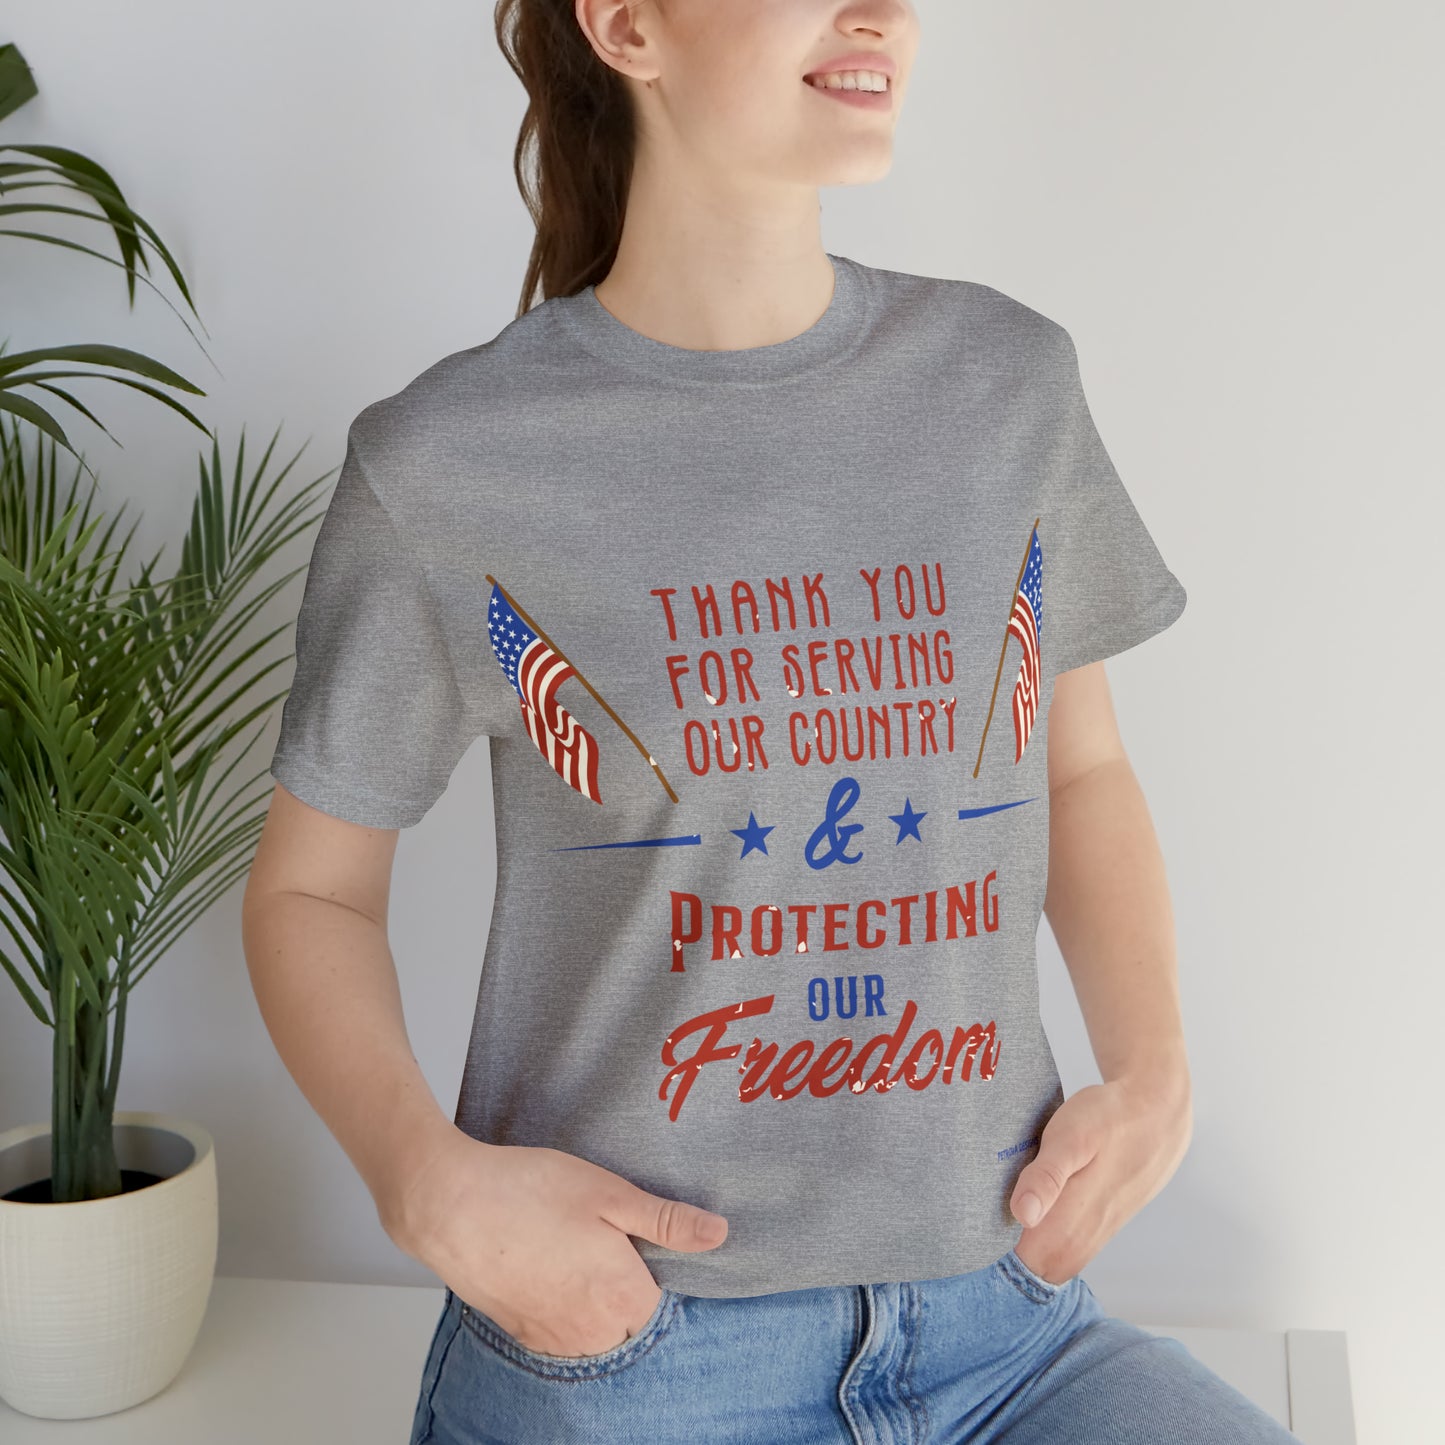 Athletic Heather T-Shirt Tshirt Design Gift for Friend and Family Short Sleeved Shirt Veterans Day Petrova Designs